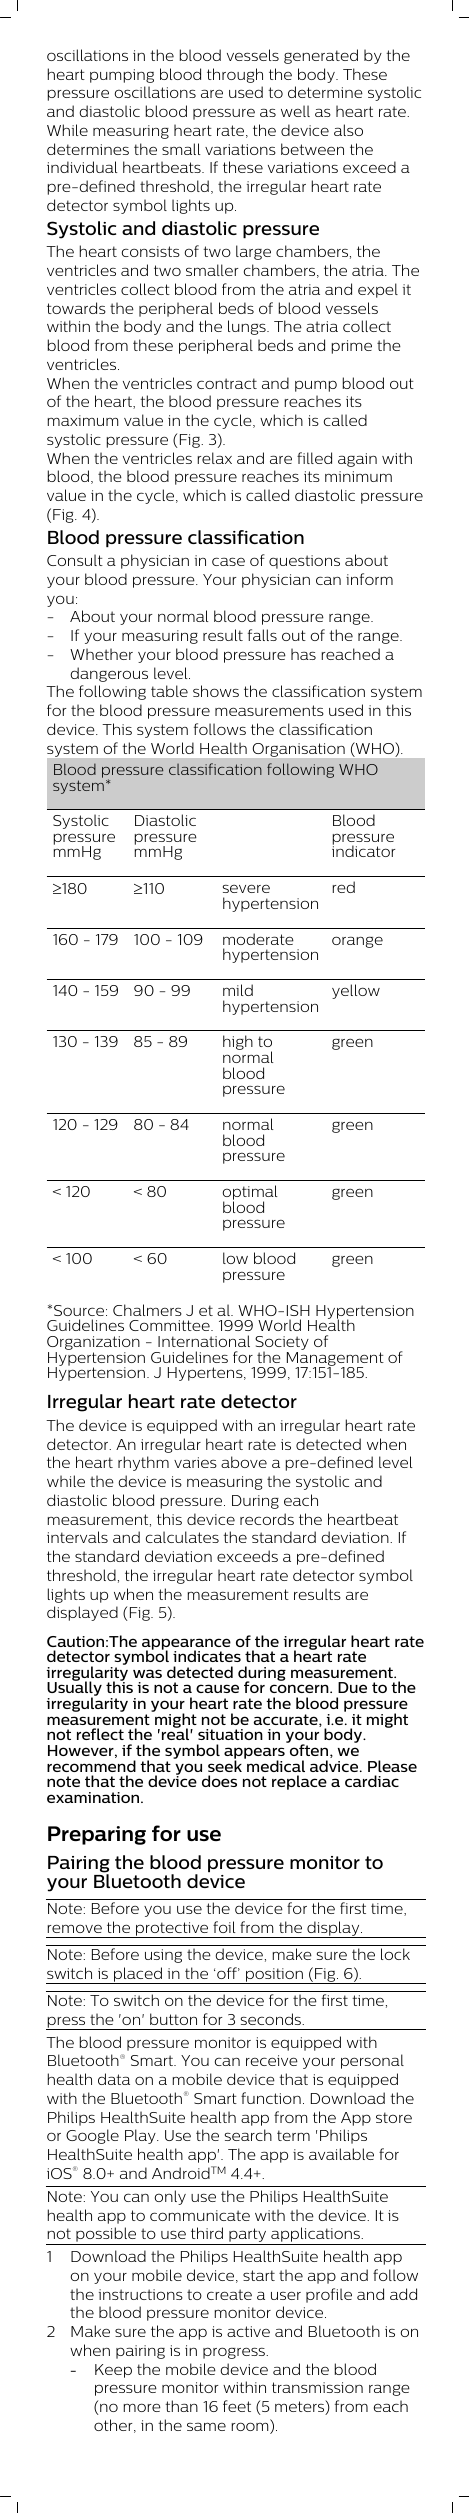 oscillations in the blood vessels generated by theheart pumping blood through the body. Thesepressure oscillations are used to determine systolicand diastolic blood pressure as well as heart rate.While measuring heart rate, the device alsodetermines the small variations between theindividual heartbeats. If these variations exceed apre-defined threshold, the irregular heart ratedetector symbol lights up.Systolic and diastolic pressureThe heart consists of two large chambers, theventricles and two smaller chambers, the atria. Theventricles collect blood from the atria and expel ittowards the peripheral beds of blood vesselswithin the body and the lungs. The atria collectblood from these peripheral beds and prime theventricles.When the ventricles contract and pump blood outof the heart, the blood pressure reaches itsmaximum value in the cycle, which is calledsystolic pressure (Fig. 3). When the ventricles relax and are filled again withblood, the blood pressure reaches its minimumvalue in the cycle, which is called diastolic pressure(Fig. 4).Blood pressure classificationConsult a physician in case of questions aboutyour blood pressure. Your physician can informyou:- About your normal blood pressure range. - If your measuring result falls out of the range. - Whether your blood pressure has reached adangerous level.The following table shows the classification systemfor the blood pressure measurements used in thisdevice. This system follows the classificationsystem of the World Health Organisation (WHO).Blood pressure classification following WHOsystem*SystolicpressuremmHgDiastolicpressuremmHg  Bloodpressureindicator³180 ³110 severehypertensionred160 - 179 100 - 109 moderatehypertensionorange140 - 159 90 - 99 mildhypertensionyellow130 - 139 85 - 89 high tonormalbloodpressuregreen120 - 129 80 - 84 normalbloodpressuregreen&lt; 120 &lt; 80 optimalbloodpressuregreen&lt; 100 &lt; 60 low bloodpressuregreen*Source: Chalmers J et al. WHO-ISH HypertensionGuidelines Committee. 1999 World HealthOrganization - International Society ofHypertension Guidelines for the Management ofHypertension. J Hypertens, 1999, 17:151-185.Irregular heart rate detectorThe device is equipped with an irregular heart ratedetector. An irregular heart rate is detected whenthe heart rhythm varies above a pre-defined levelwhile the device is measuring the systolic anddiastolic blood pressure. During eachmeasurement, this device records the heartbeatintervals and calculates the standard deviation. Ifthe standard deviation exceeds a pre-definedthreshold, the irregular heart rate detector symbollights up when the measurement results aredisplayed (Fig. 5).Caution:The appearance of the irregular heart ratedetector symbol indicates that a heart rateirregularity was detected during measurement.Usually this is not a cause for concern. Due to theirregularity in your heart rate the blood pressuremeasurement might not be accurate, i.e. it mightnot reflect the &apos;real&apos; situation in your body.However, if the symbol appears often, werecommend that you seek medical advice. Pleasenote that the device does not replace a cardiacexamination.Preparing for usePairing the blood pressure monitor toyour Bluetooth deviceNote: Before you use the device for the first time,remove the protective foil from the display. Note: Before using the device, make sure the lockswitch is placed in the ‘off’ position (Fig. 6).Note: To switch on the device for the first time,press the &apos;on&apos; button for 3 seconds.The blood pressure monitor is equipped withBluetooth® Smart. You can receive your personalhealth data on a mobile device that is equippedwith the Bluetooth® Smart function. Download thePhilips HealthSuite health app from the App storeor Google Play. Use the search term &apos;PhilipsHealthSuite health app&apos;. The app is available foriOS® 8.0+ and AndroidTM 4.4+. Note: You can only use the Philips HealthSuitehealth app to communicate with the device. It isnot possible to use third party applications.1 Download the Philips HealthSuite health appon your mobile device, start the app and followthe instructions to create a user profile and addthe blood pressure monitor device.2 Make sure the app is active and Bluetooth is onwhen pairing is in progress.-Keep the mobile device and the bloodpressure monitor within transmission range(no more than 16 feet (5 meters) from eachother, in the same room).